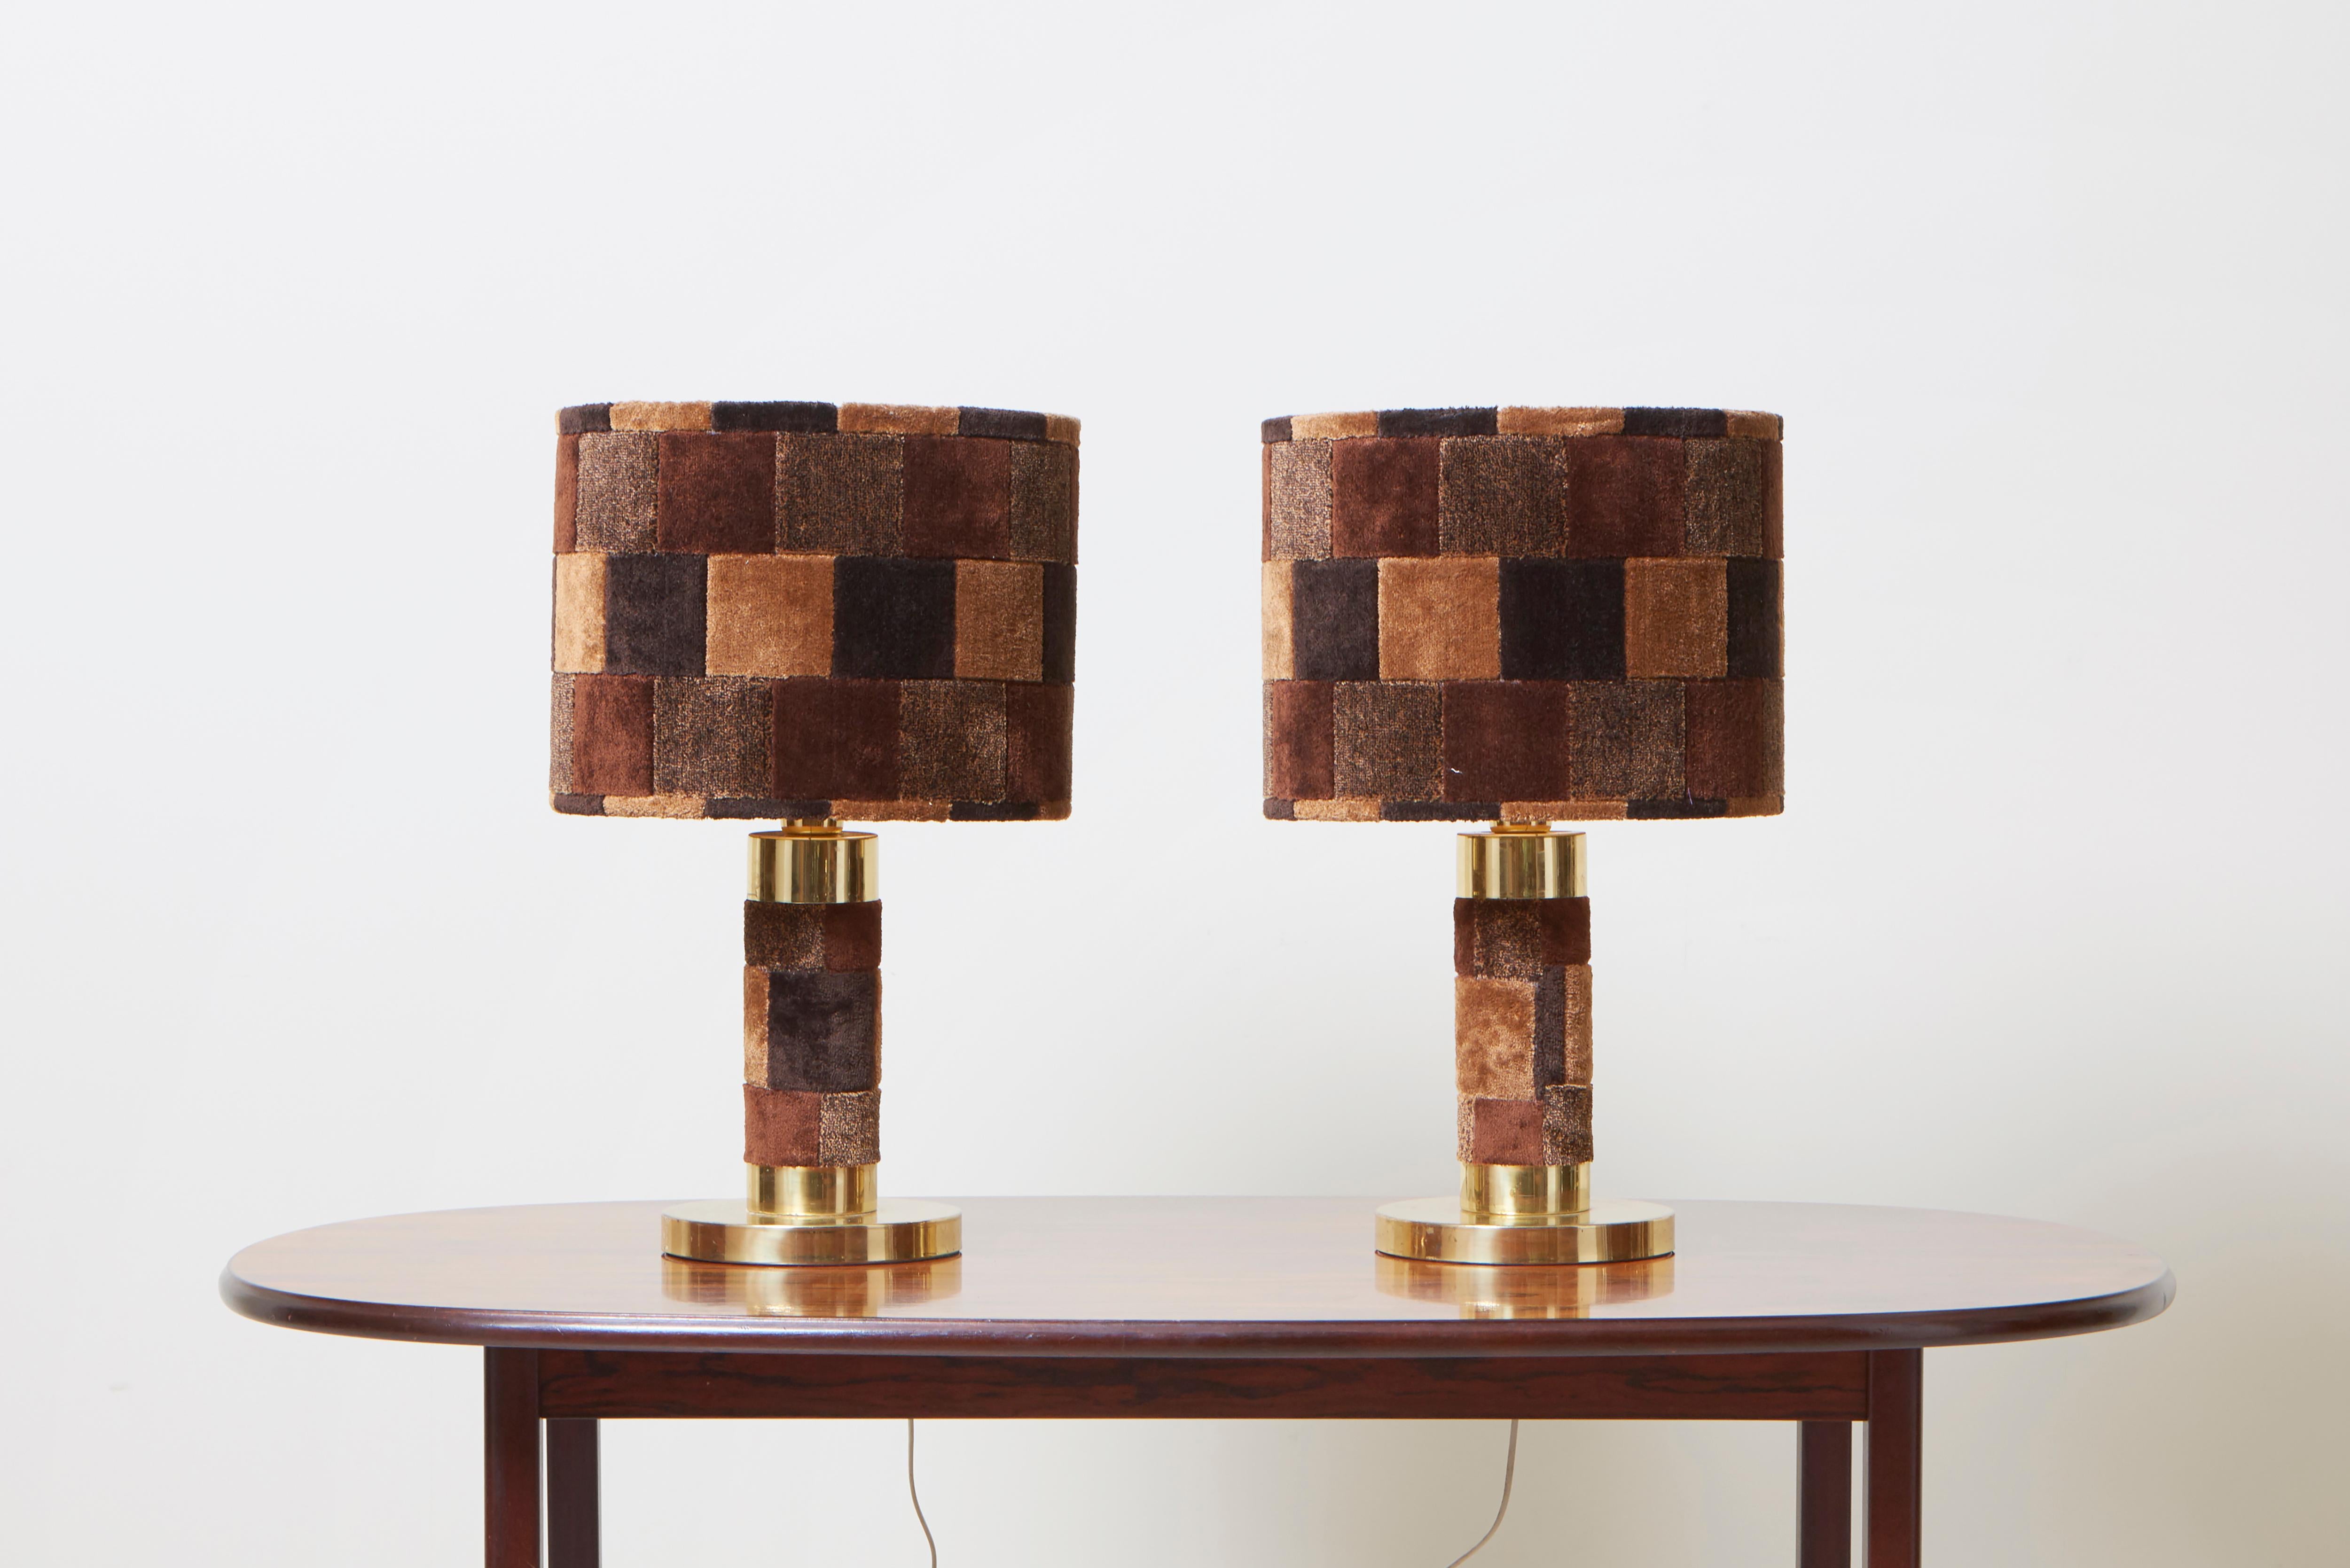 Pair of 1970s table lamps in brass and carpet in Hollywood Regency design.
1 x E27 / A bulb each lamp.

To be on the safe side, the lamp should be checked locally by a specialist concerning local requirements.